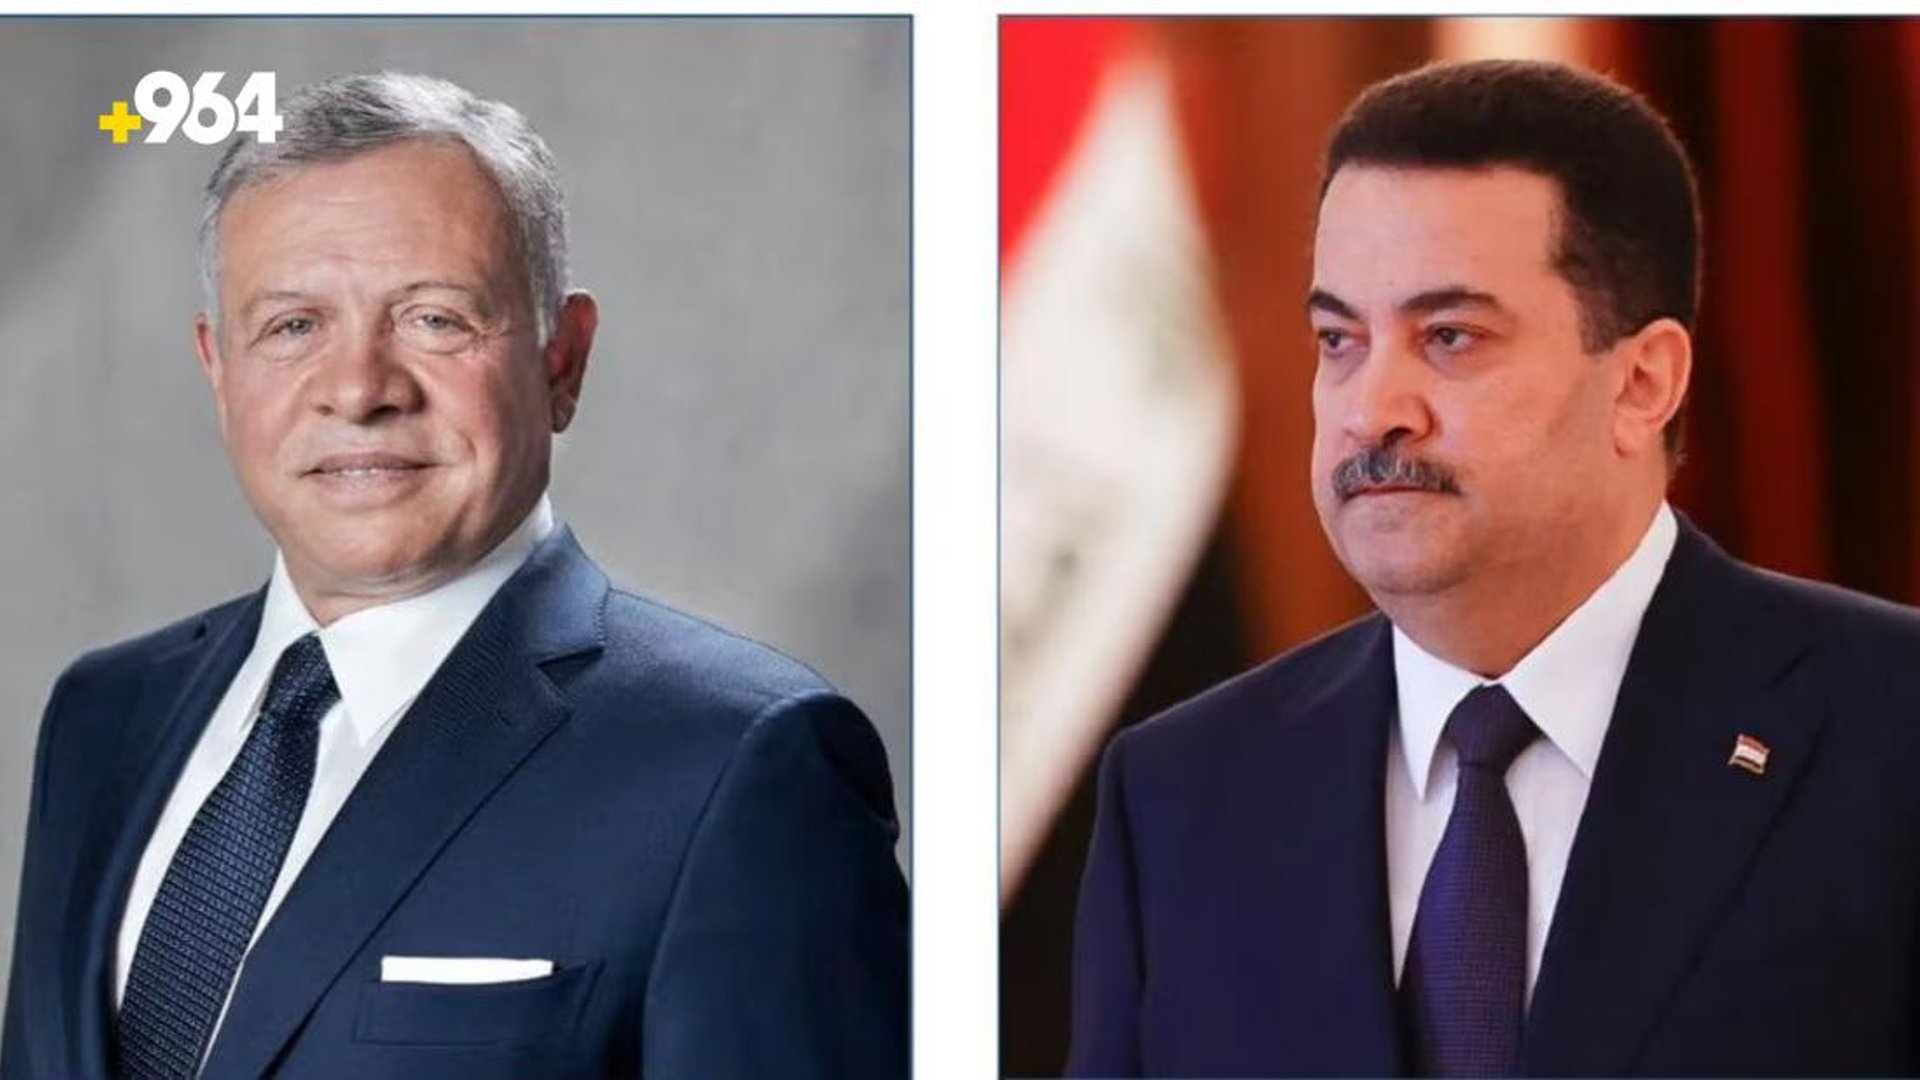 Jordans king and Iraqi prime minister discuss Palestinian situation by phone